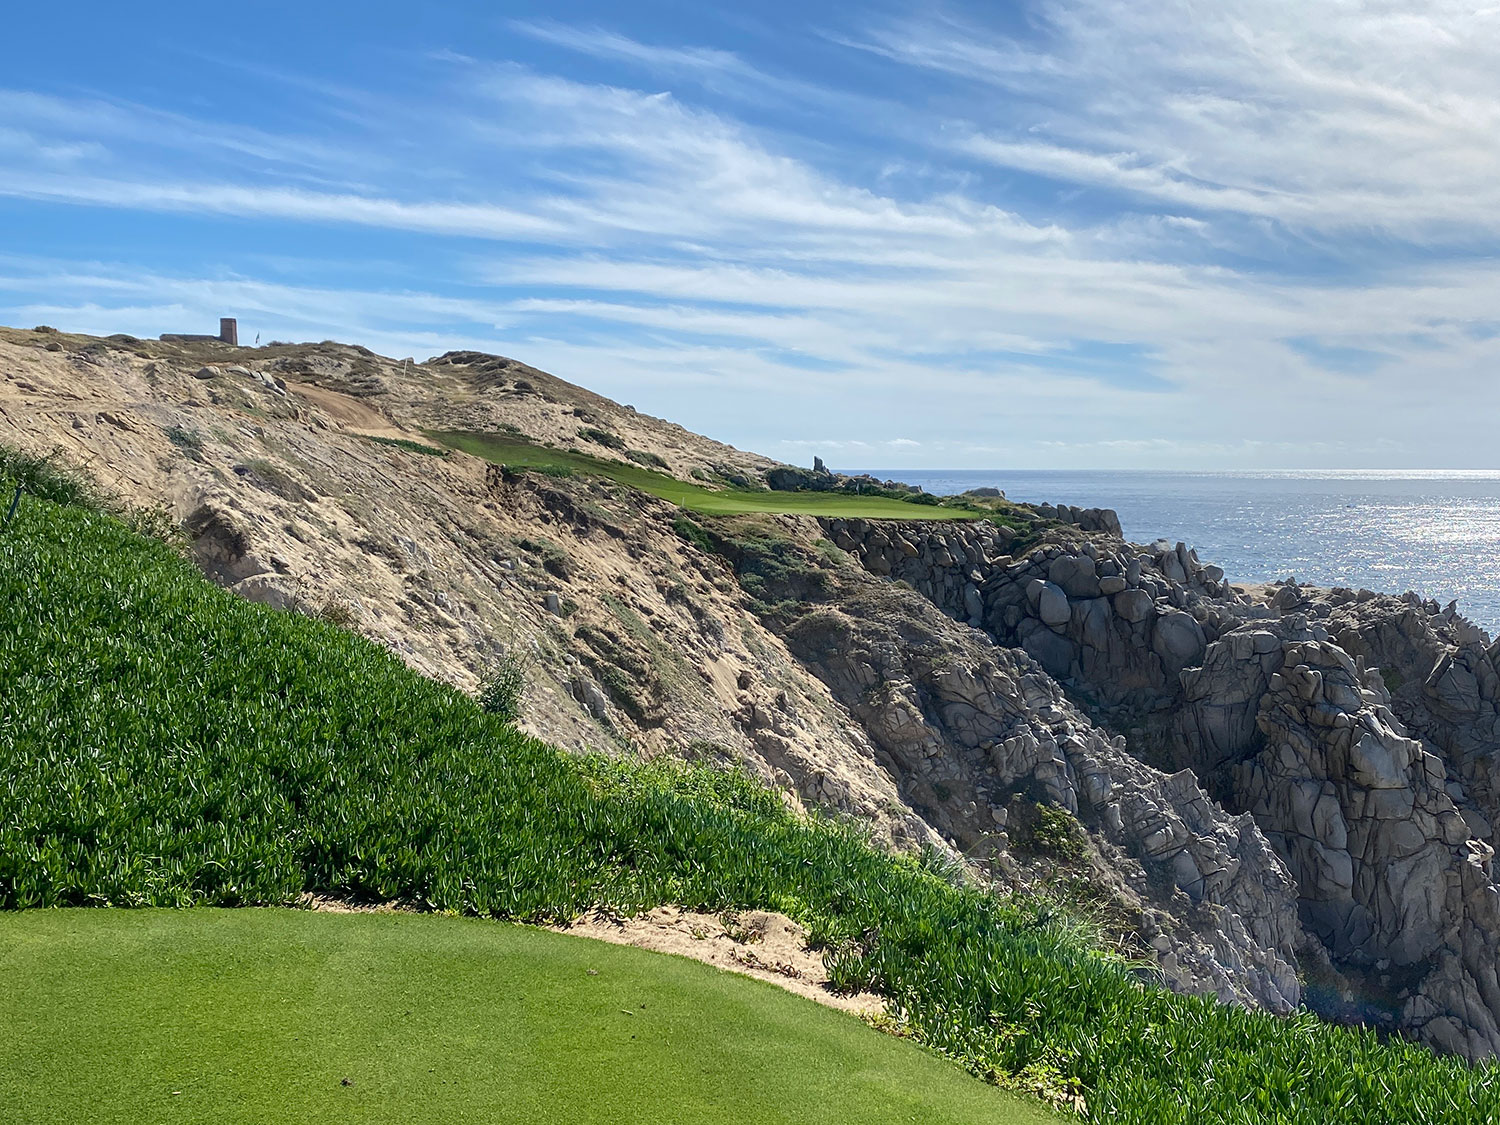 The view from the tee box on the 13th hole at Quivira Golf Club.